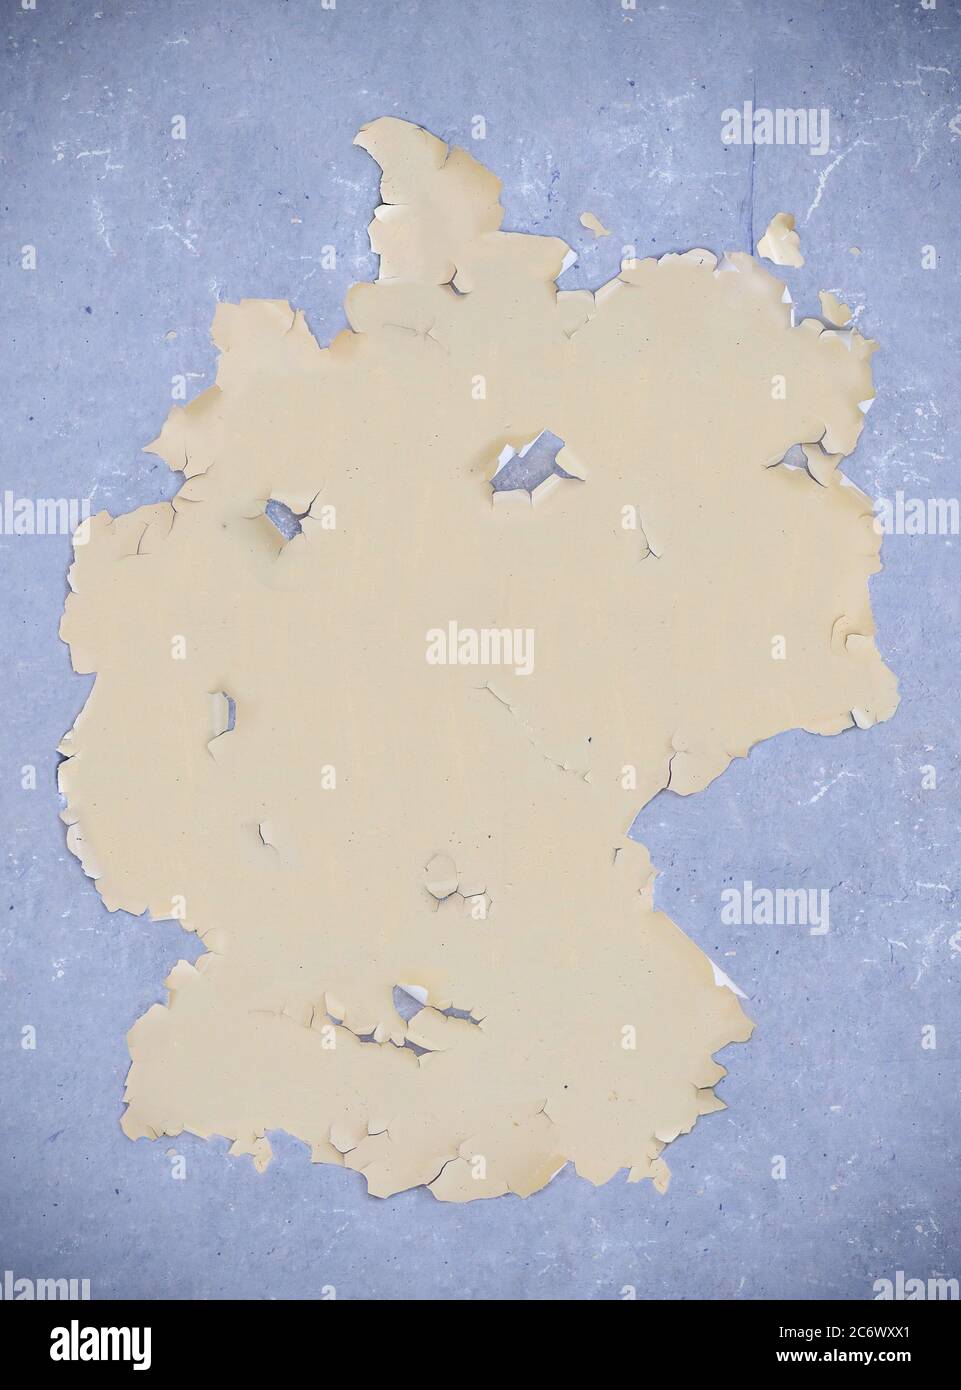 Unusual map of the Germany, map from cracked plaster Stock Photo